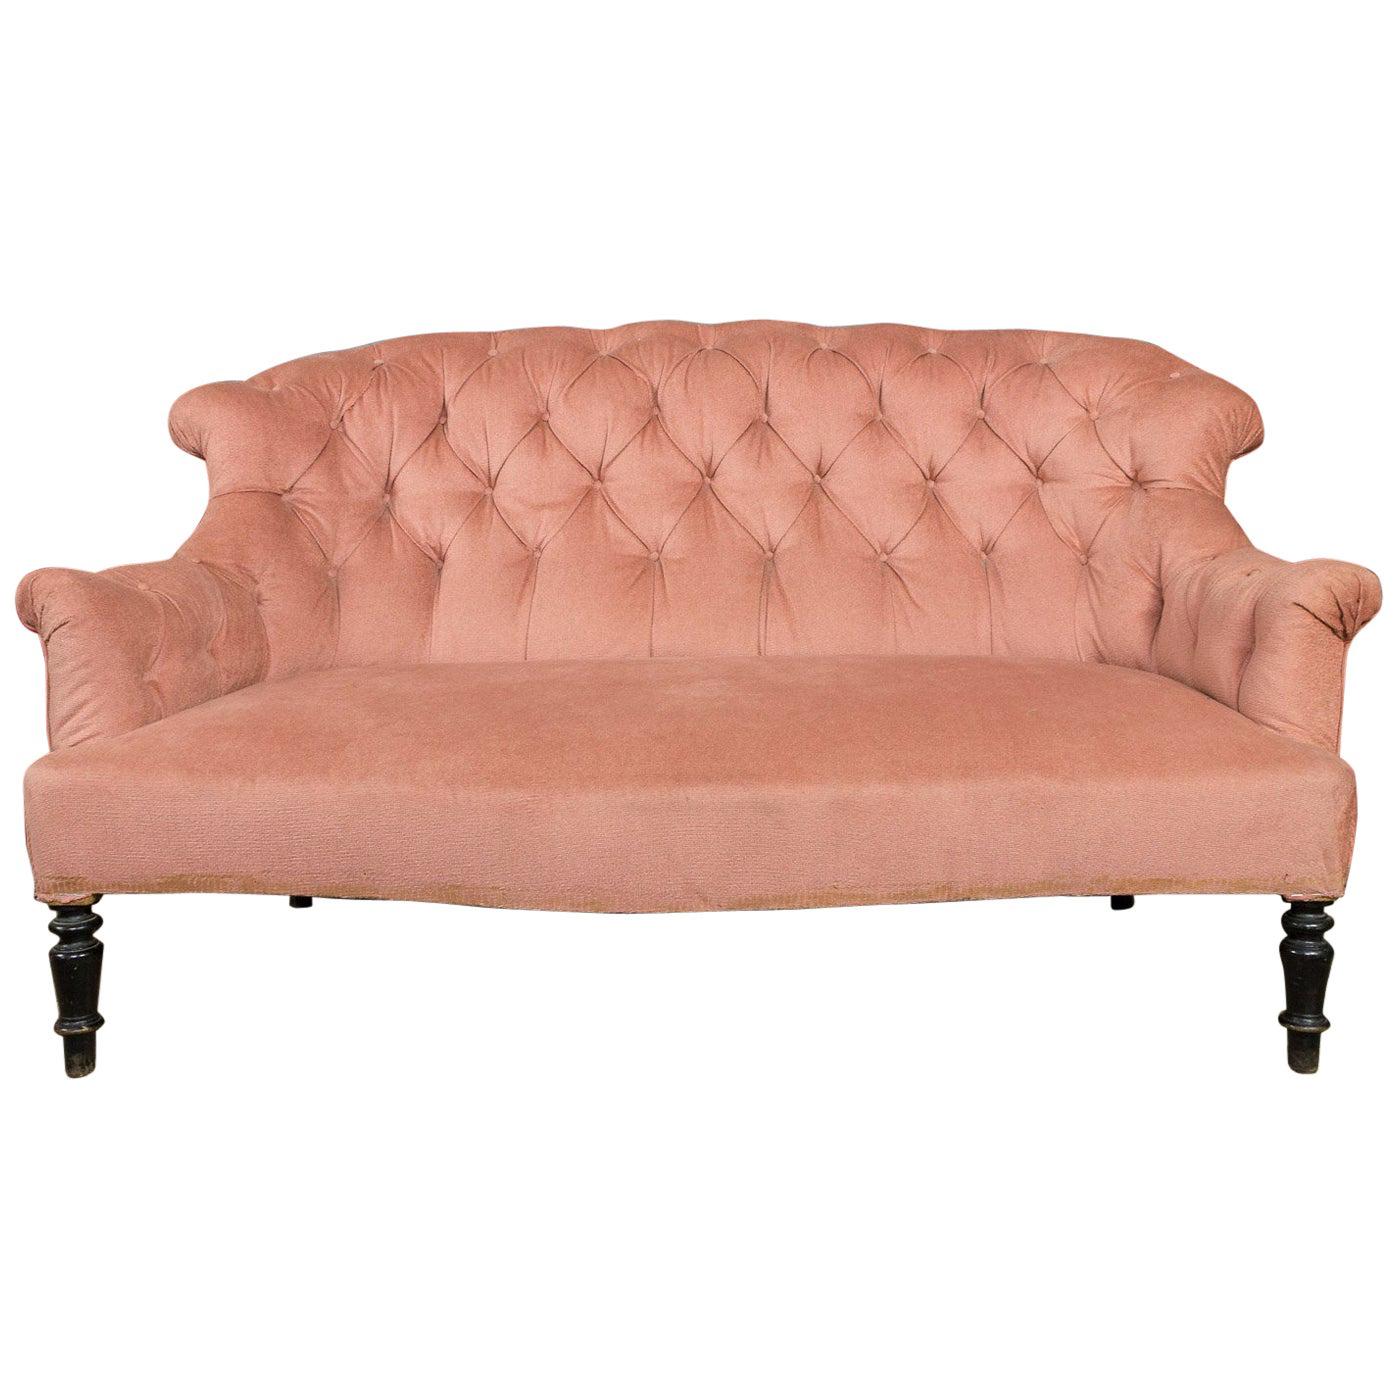 19th Century French Pink Tufted Settee